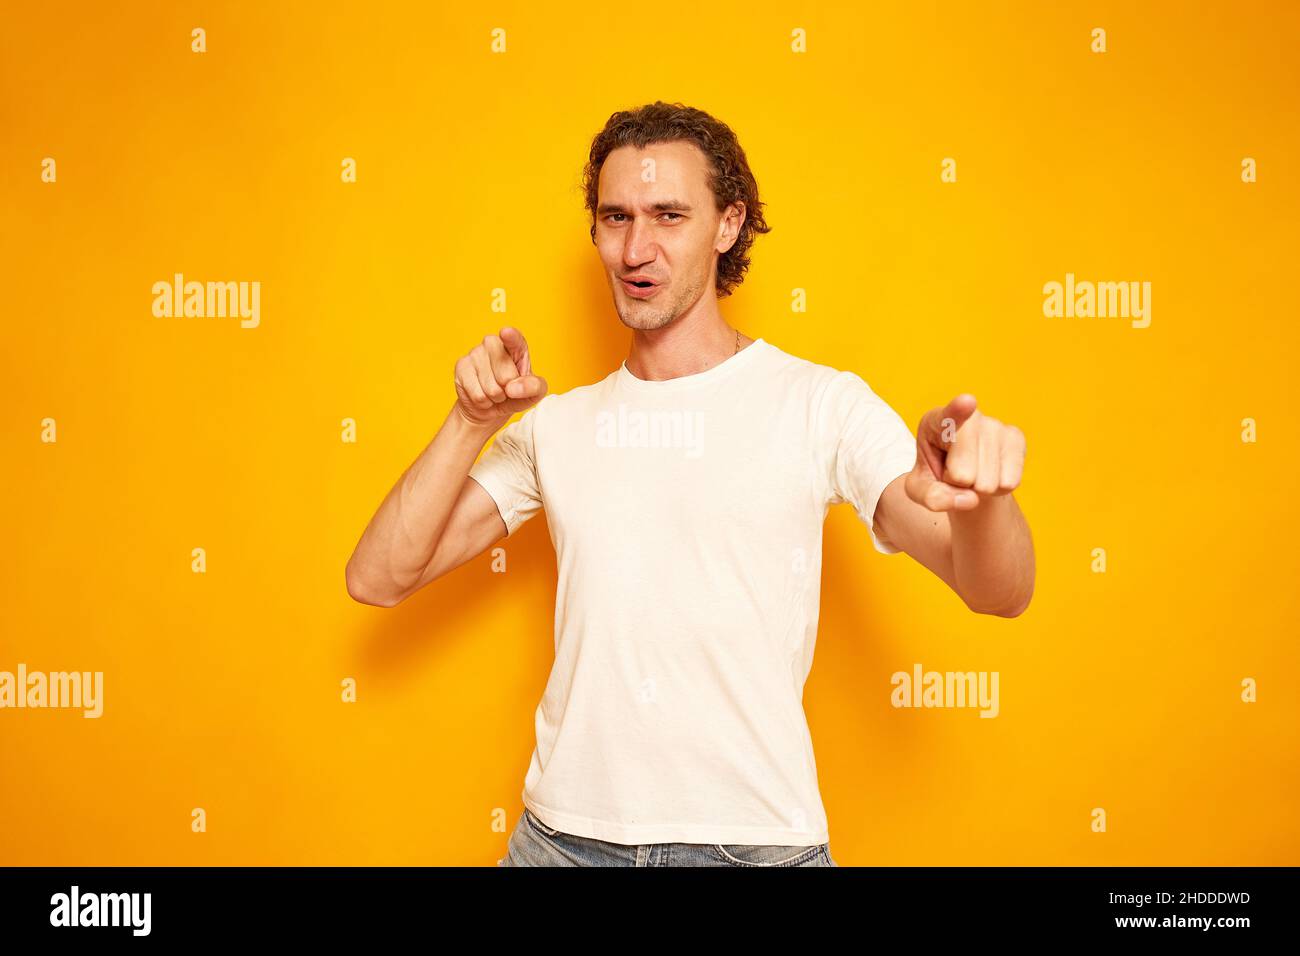 young, joyful, curly-haired man points his index fingers in front of him, hinting that you are best, winner. isolated yellow background with space for text. concept people, victory, advantage, delight. High quality photo Stock Photo